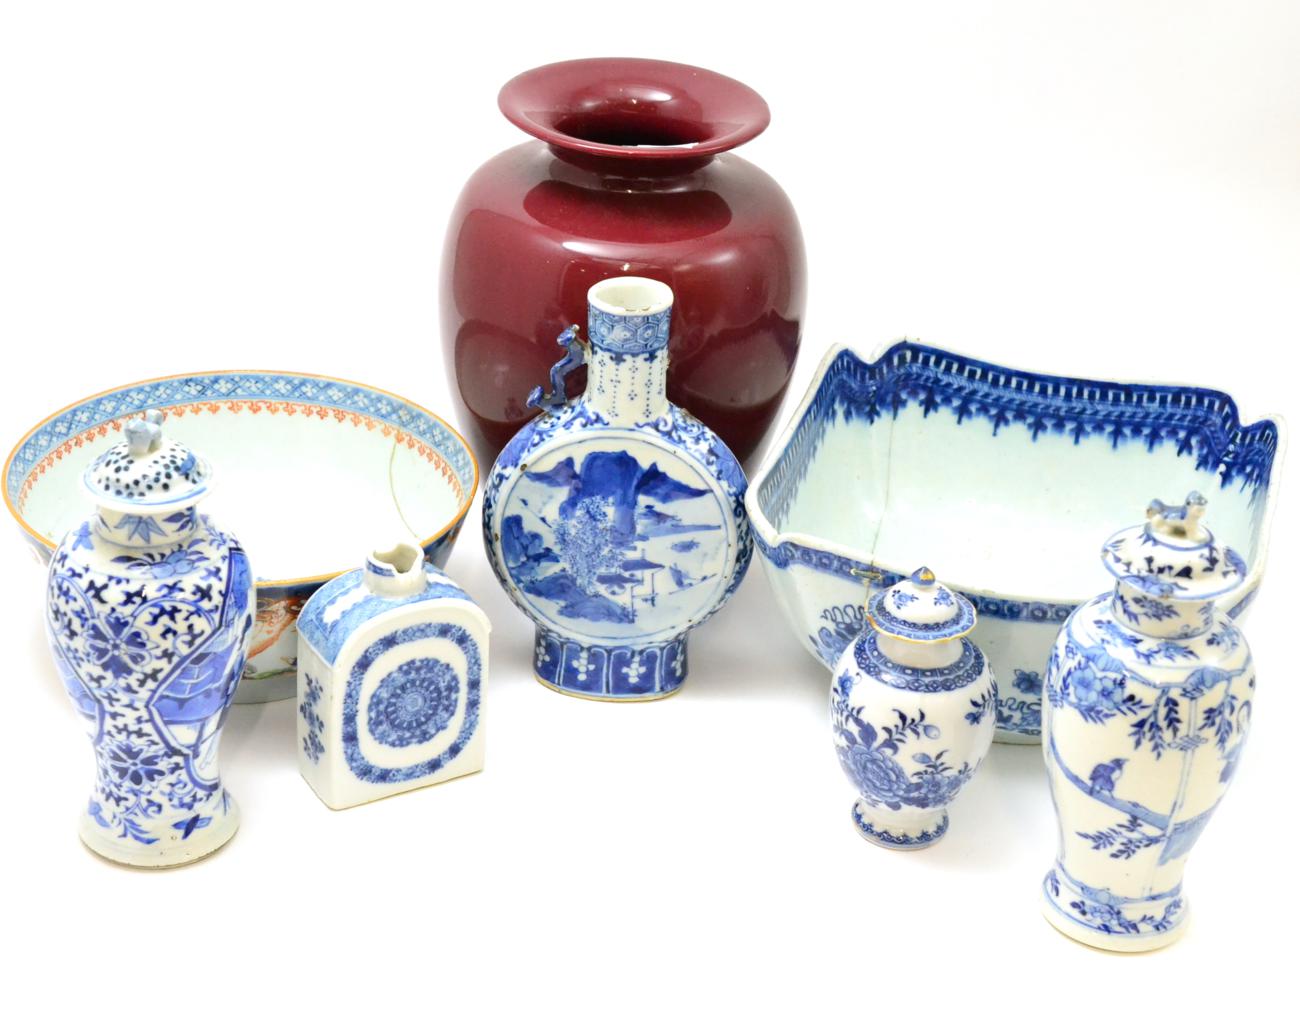 A collection of 18th/19th century Oriental ceramics including a blue and white bowl, a pair of